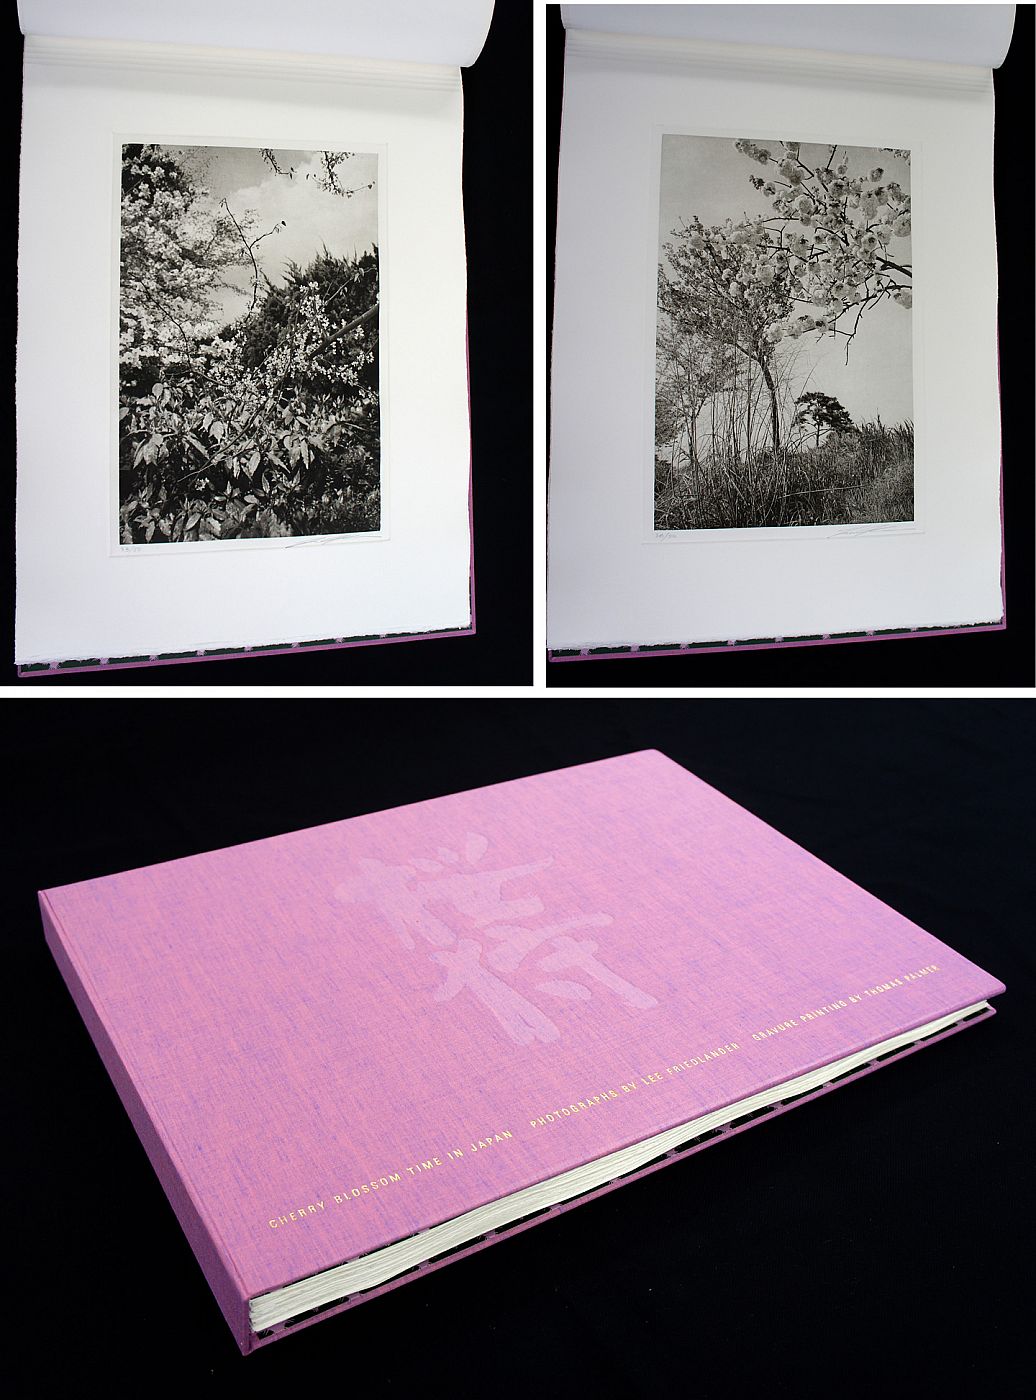 Lee Friedlander: Cherry Blossom Time in Japan (Special Limited Edition Book of 25 Photogravure Prints)